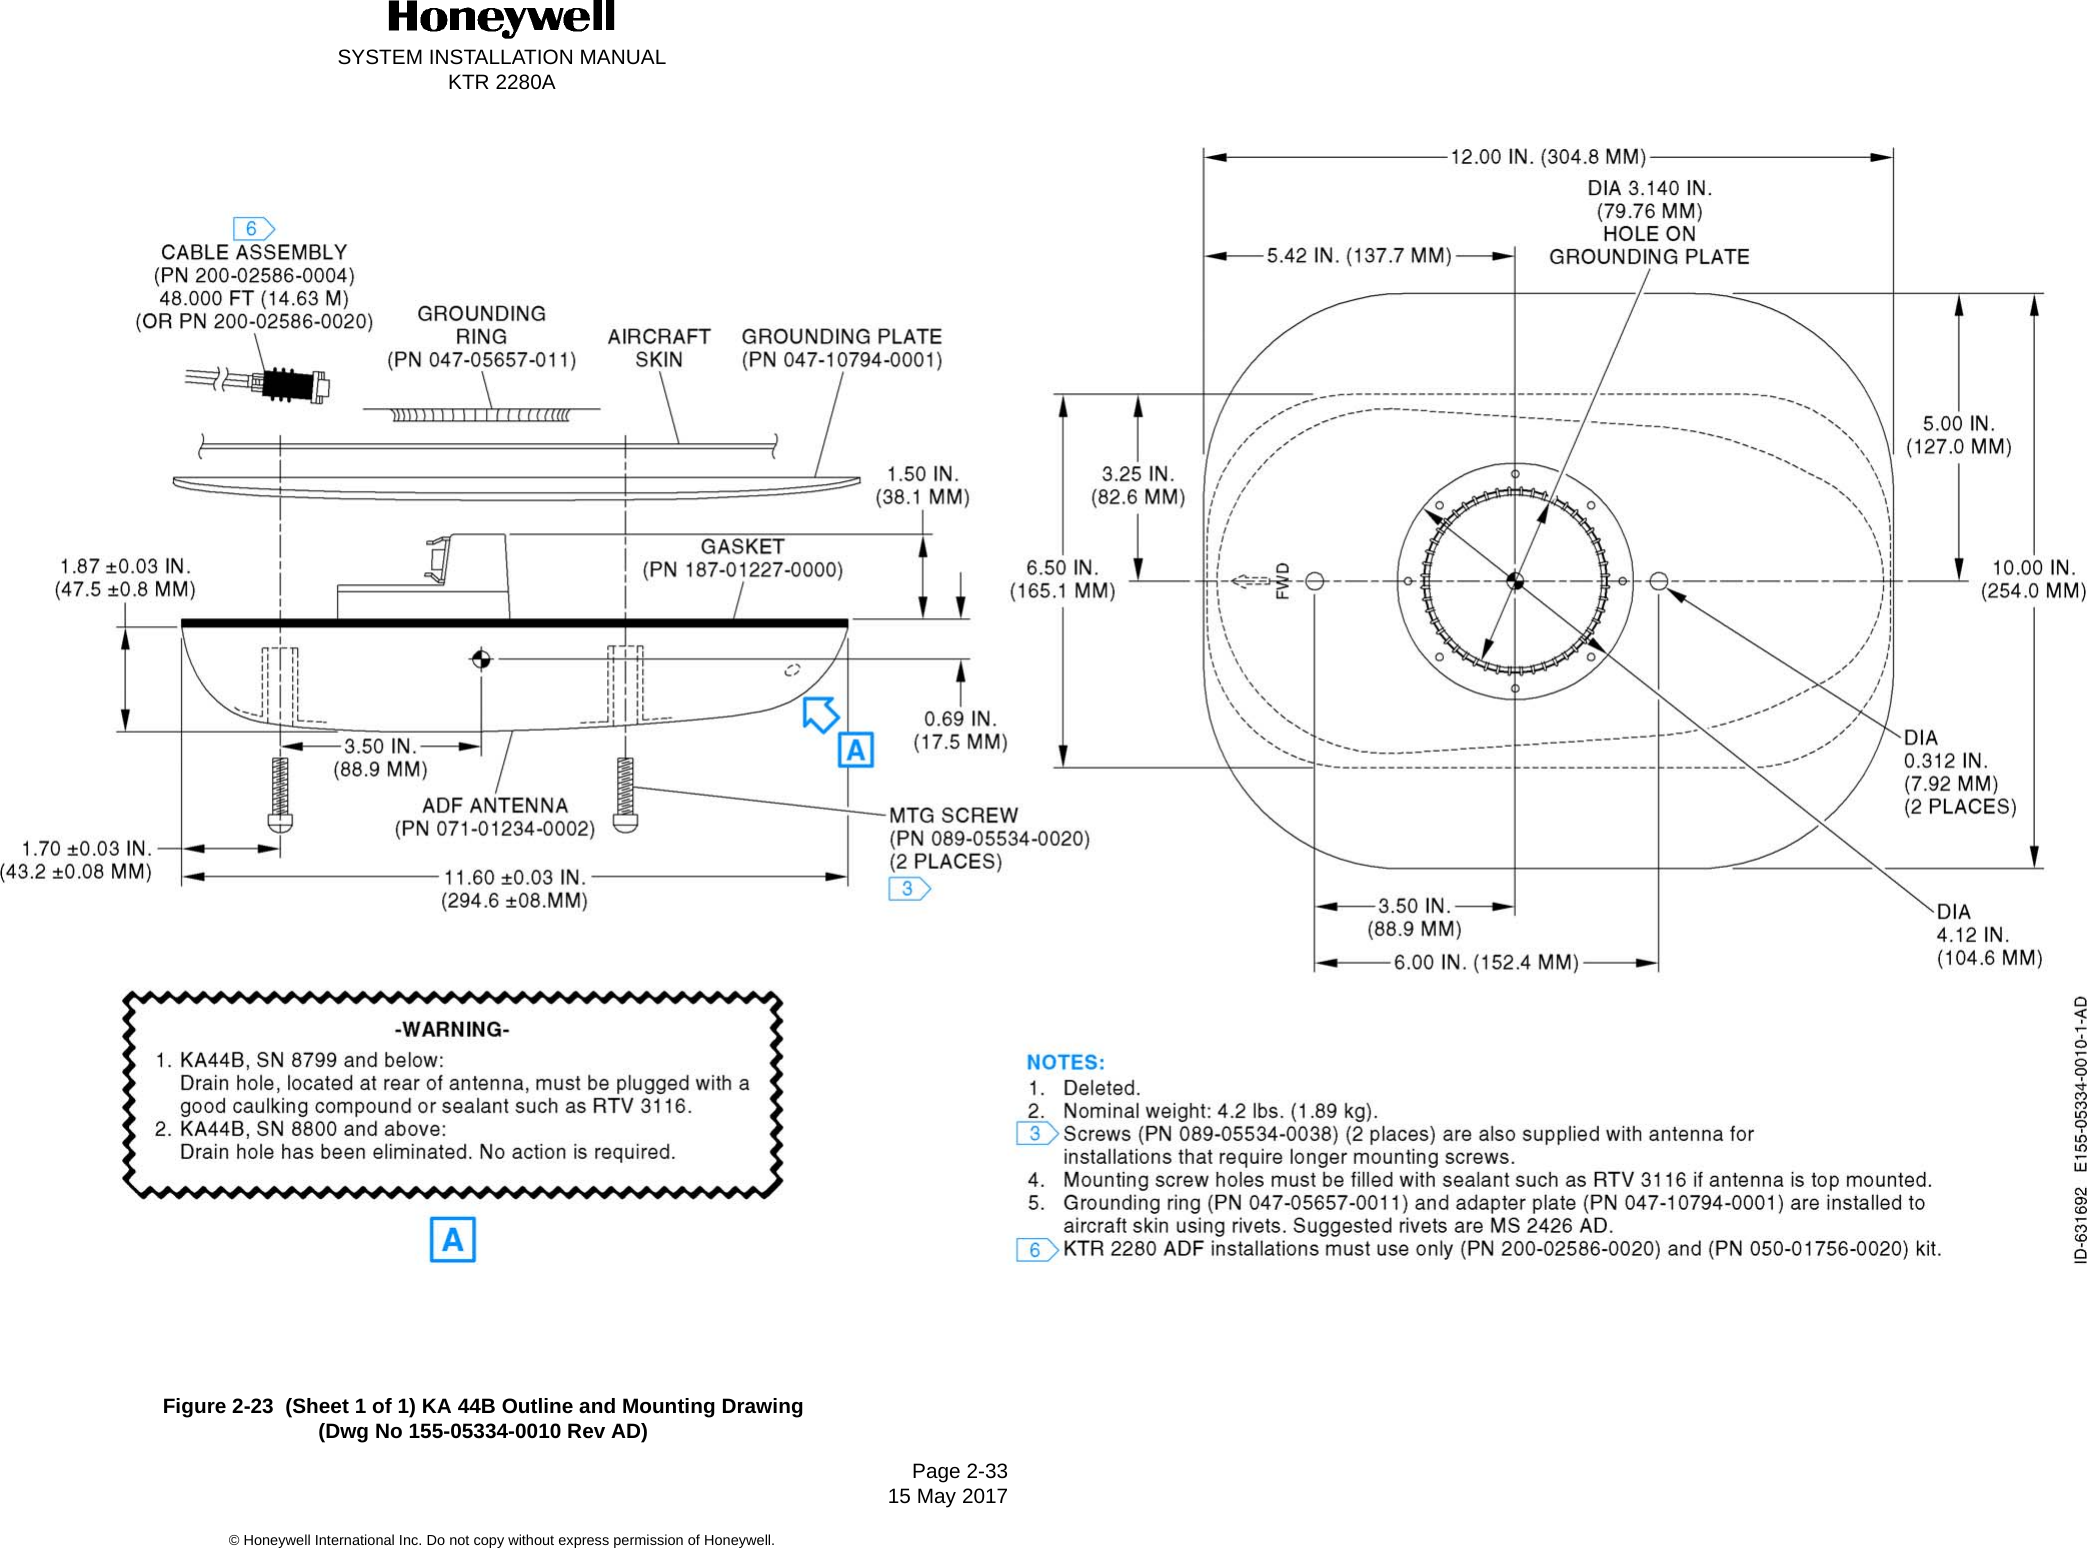 SYSTEM INSTALLATION MANUALKTR 2280APage 2-33 15 May 2017© Honeywell International Inc. Do not copy without express permission of Honeywell.Figure 2-23  (Sheet 1 of 1) KA 44B Outline and Mounting Drawing(Dwg No 155-05334-0010 Rev AD)